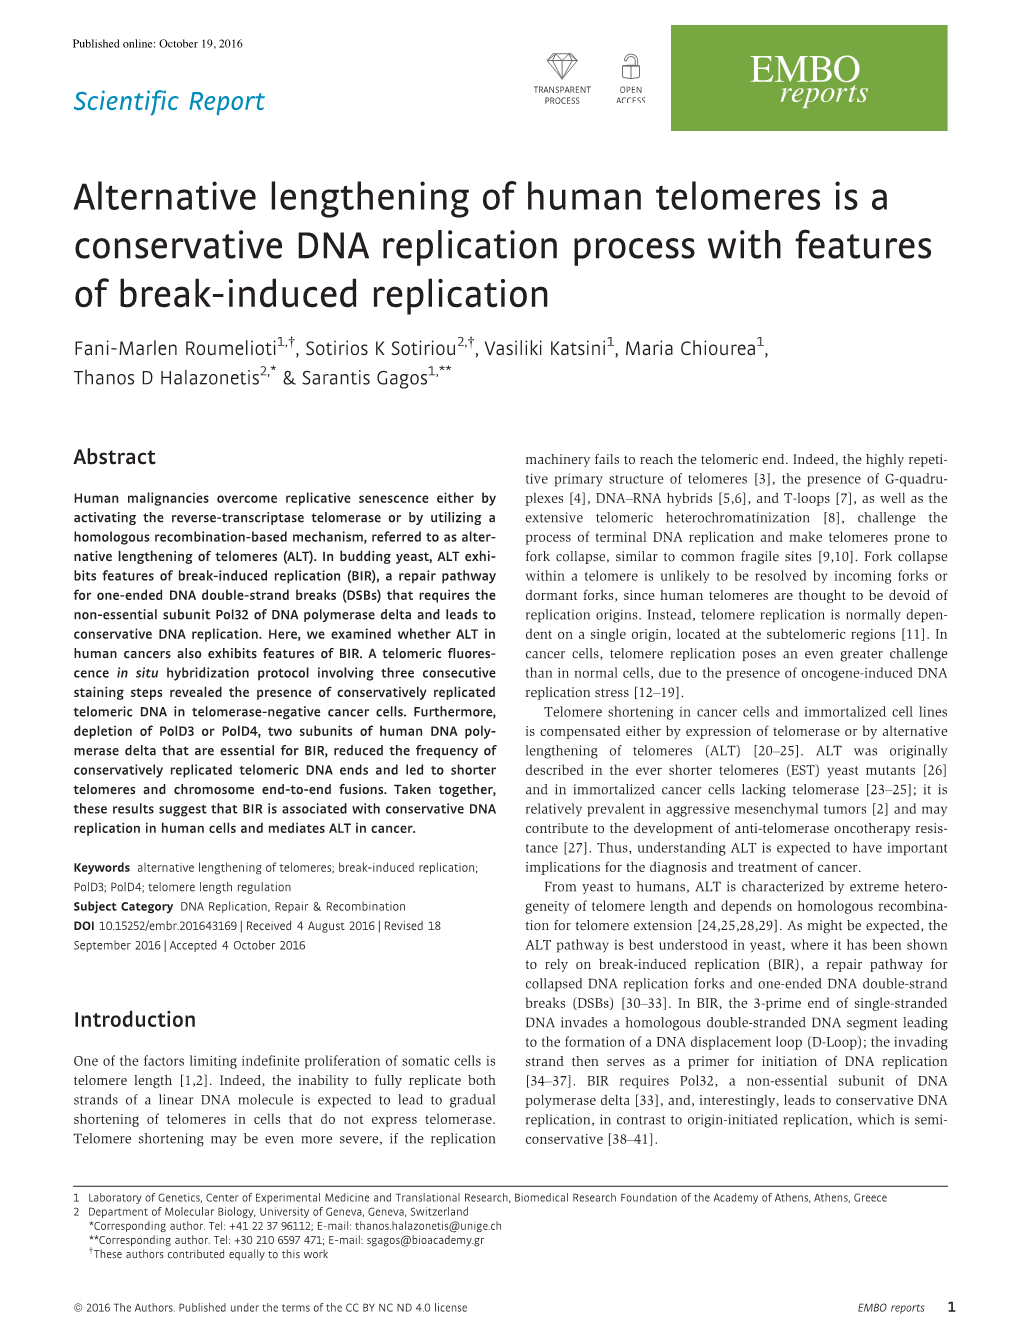 Alternative Lengthening of Human Telomeres Is a Conservative DNA Replication Process with Features of Break-Induced Replication